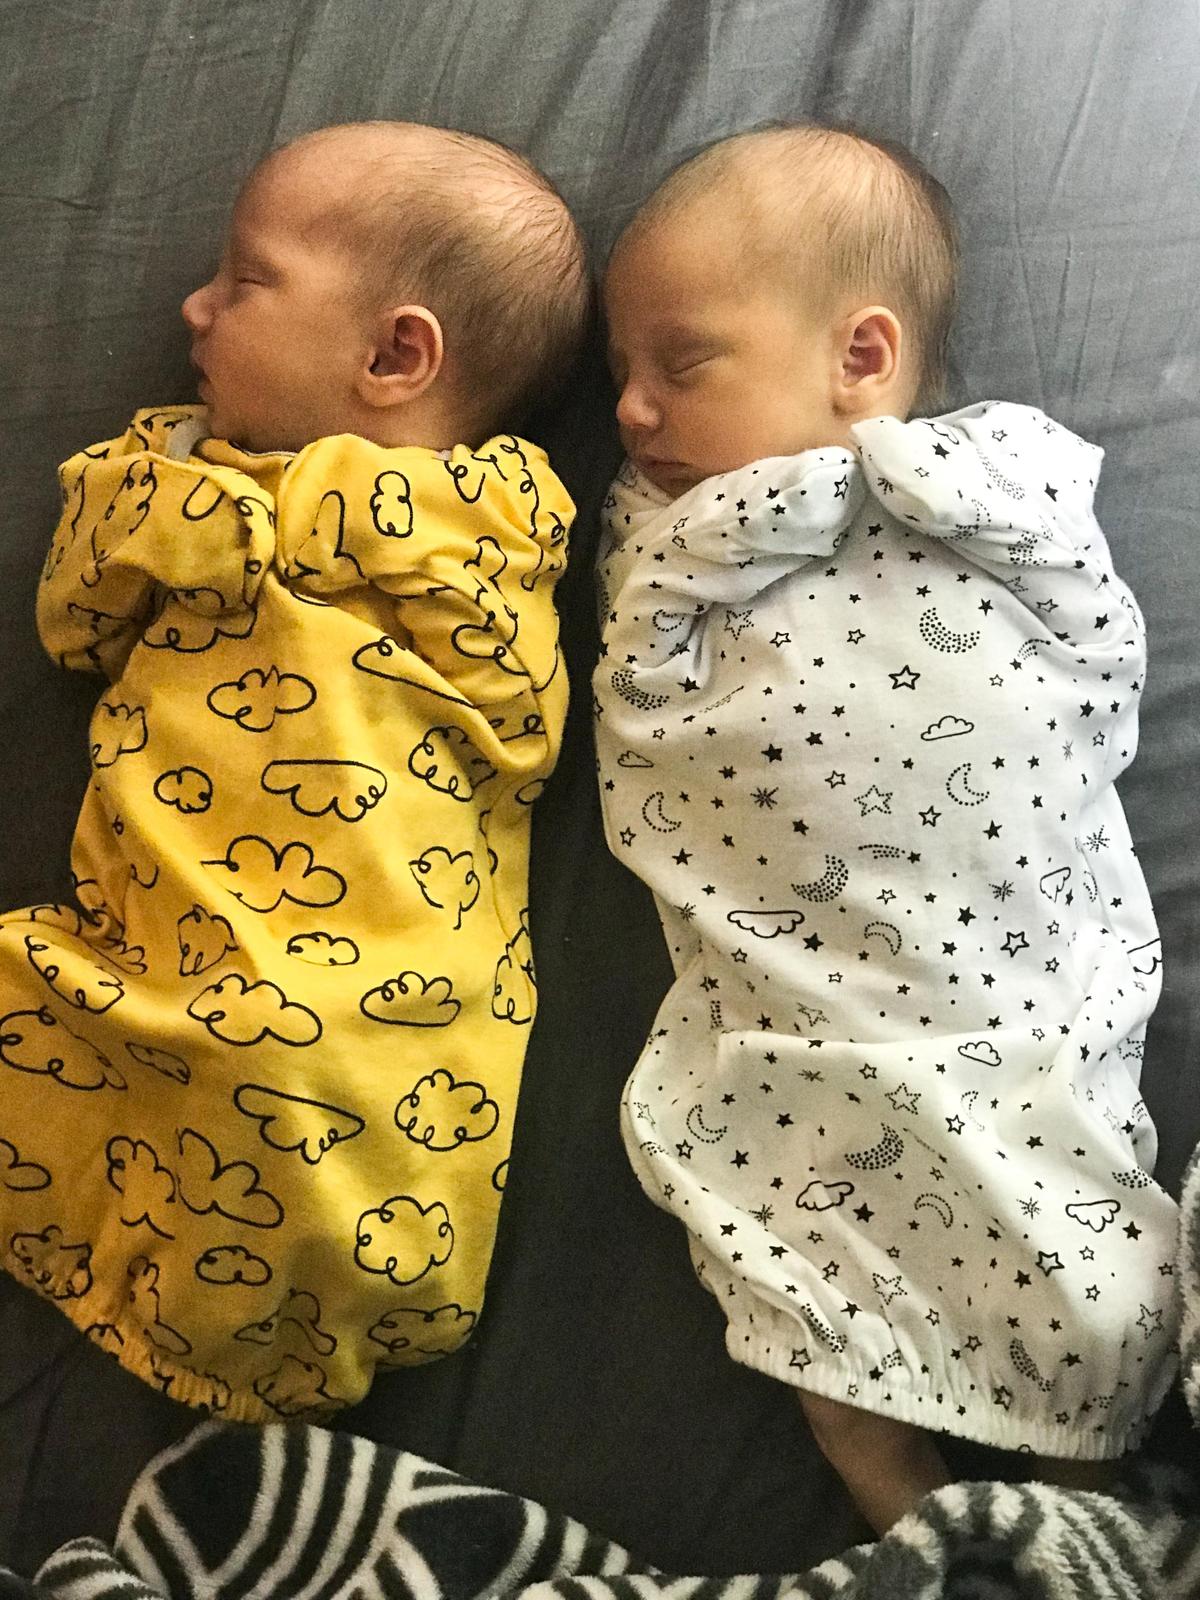 Twins Ada Maze and Billie June. (Caters News)